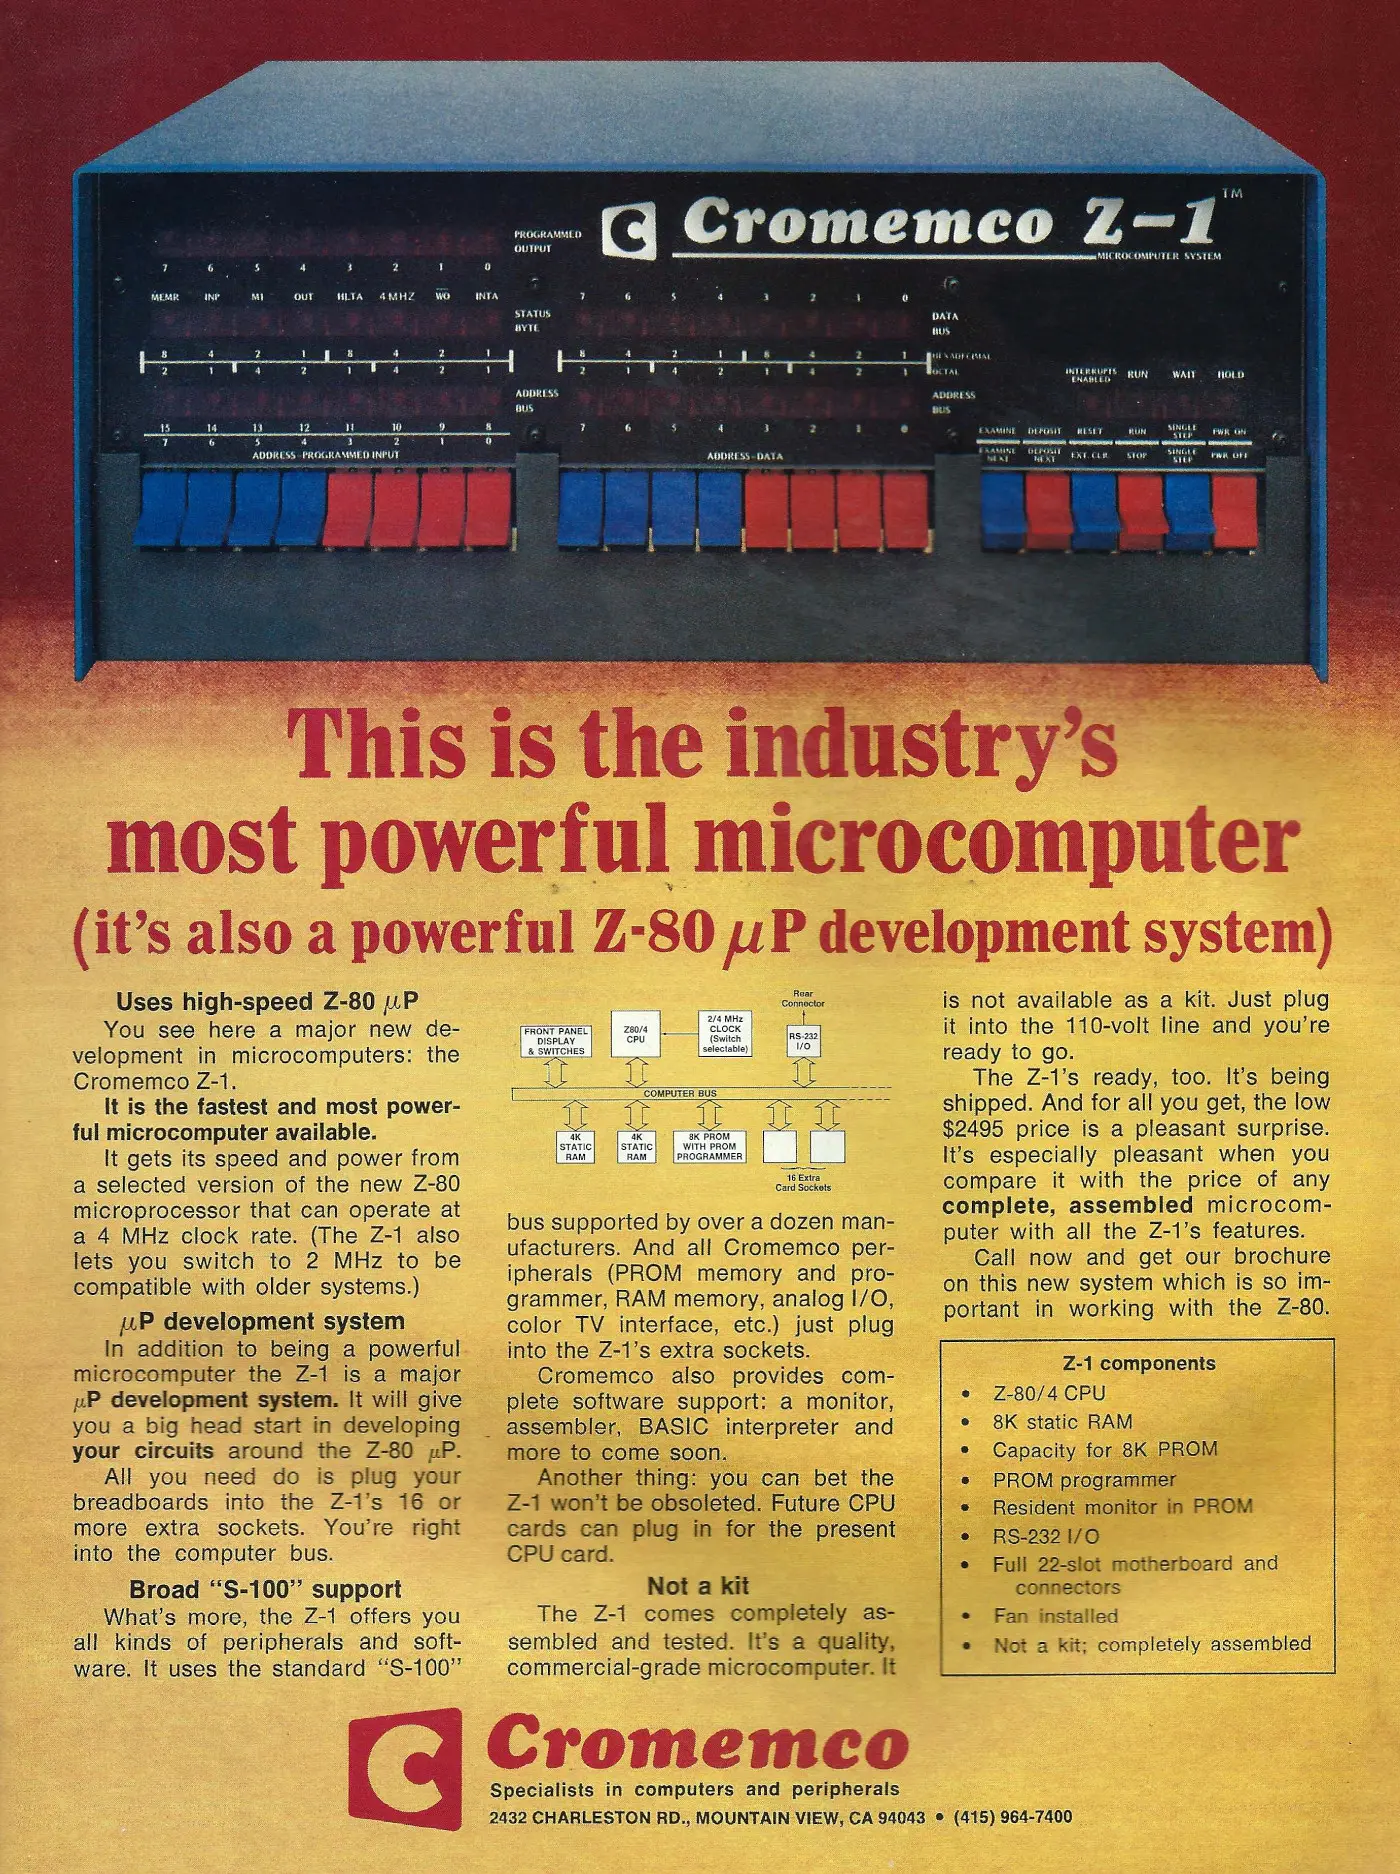 Cromemco Advert: Cromemco Z-1: This is the industry's most powerful microcomputer, from Byte - The Small Systems Journal, January 1977